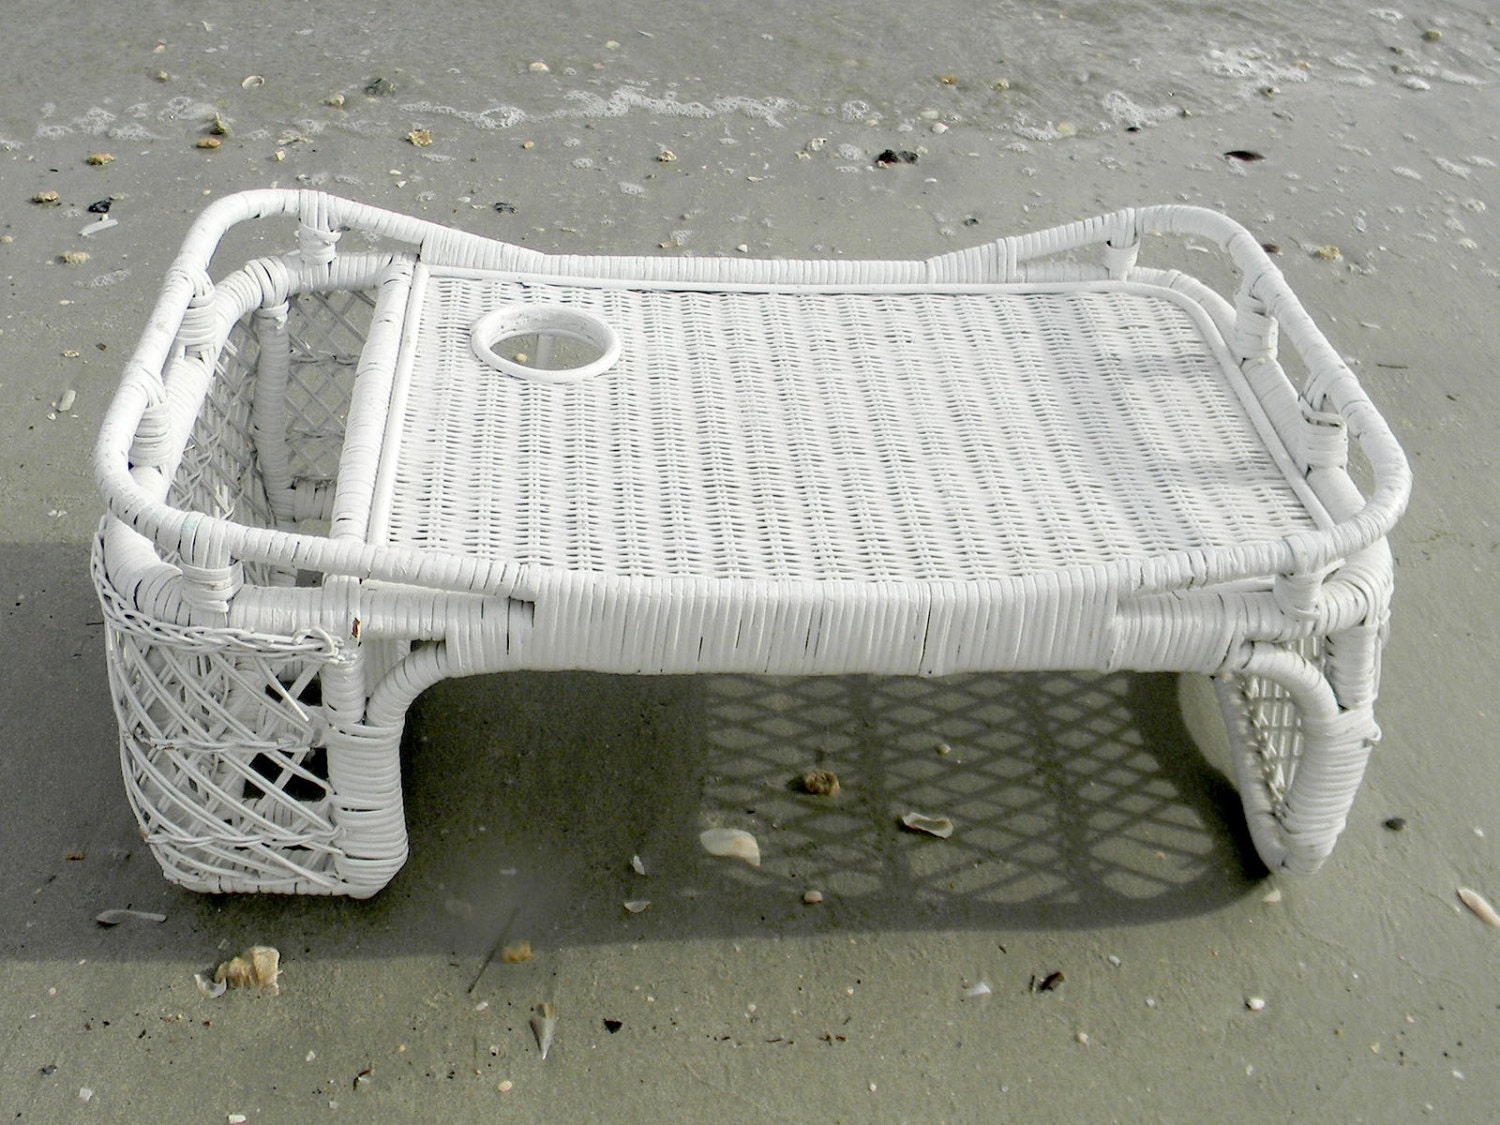 Wicker Breakfast in Bed Tray Serving Tray with Magazine and